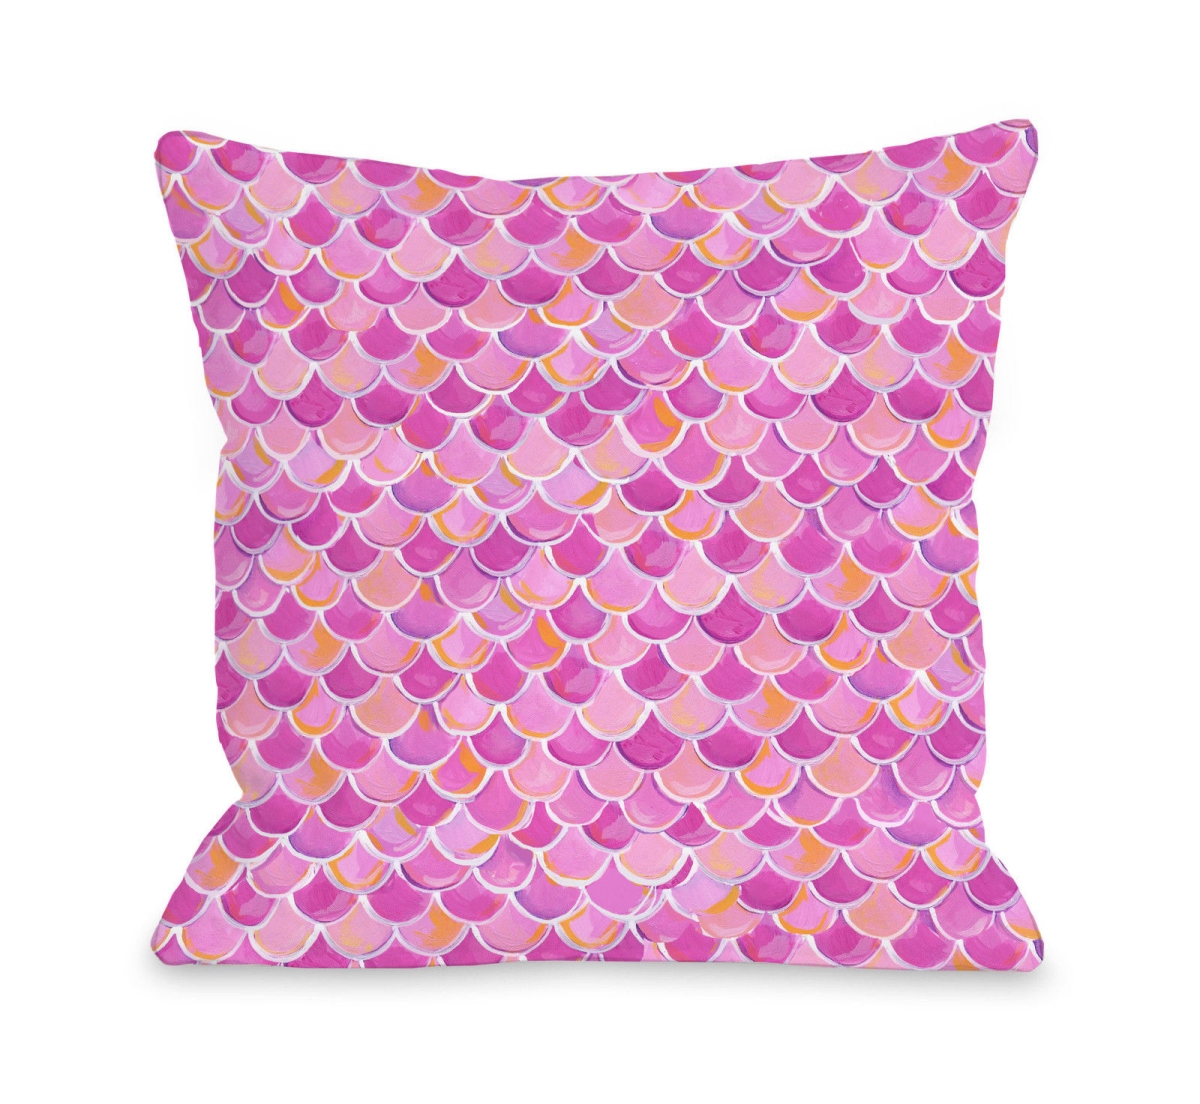 73209pl16 16 X 16 In. Love From Nyc 13 Scale Pattern Pillow By Pinklight Studio April Heather Art - Pink & Multicolor